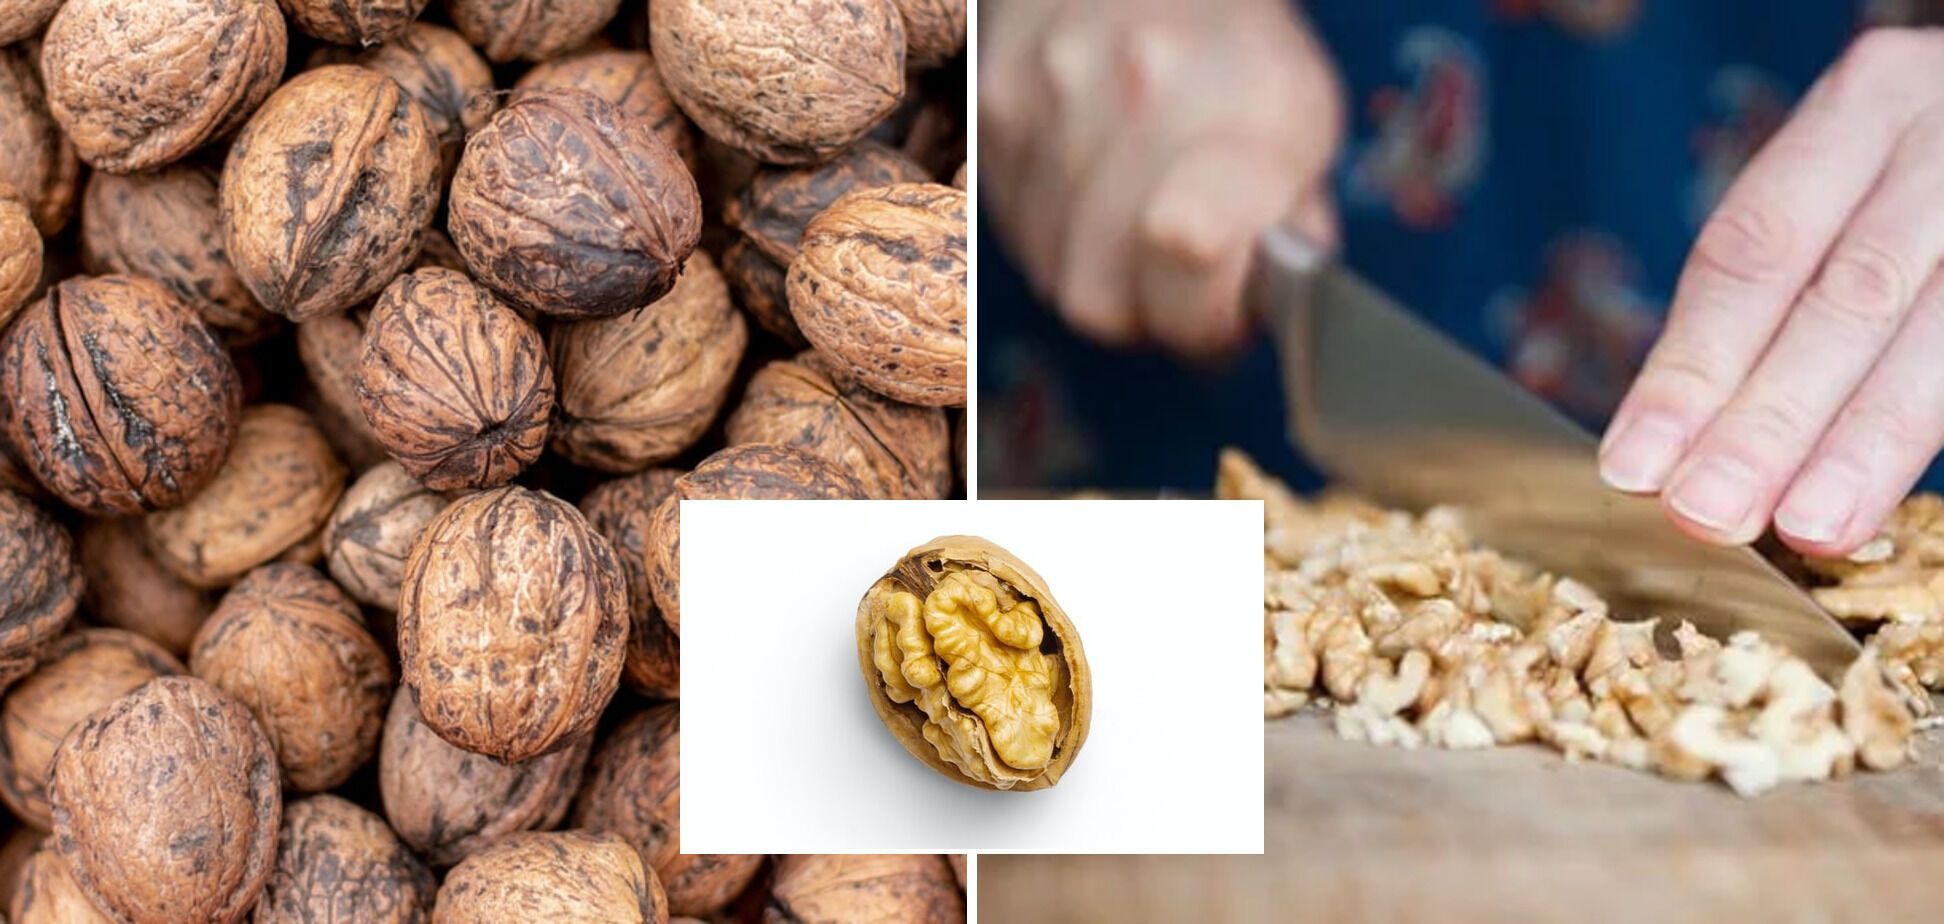 Nut consumption can reduce age-related diseases